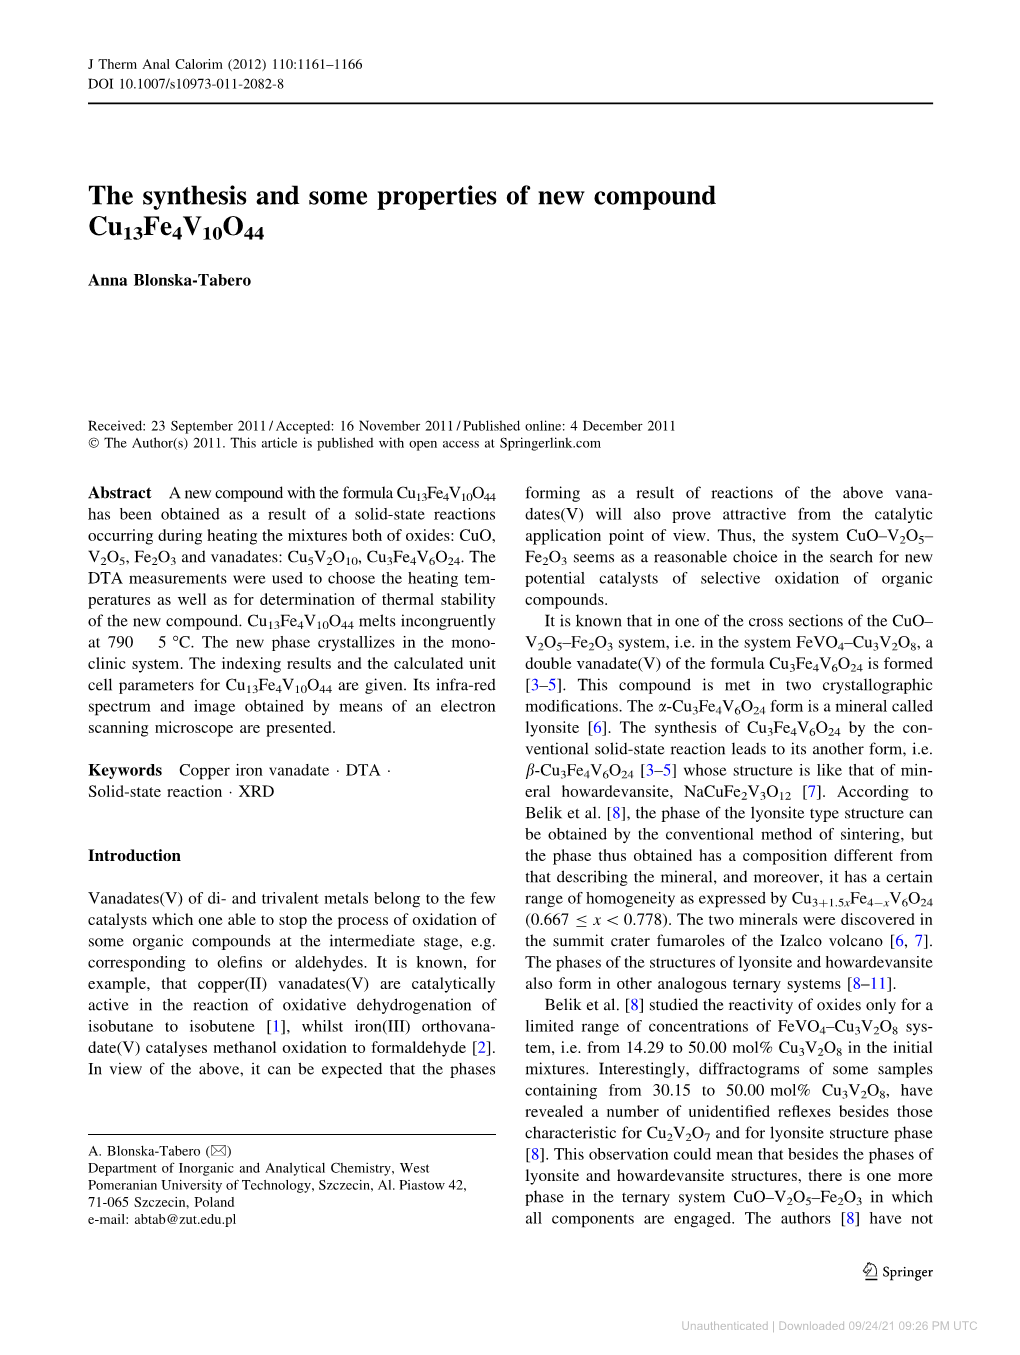 The Synthesis and Some Properties of New Compound Cu13fe4v10o44